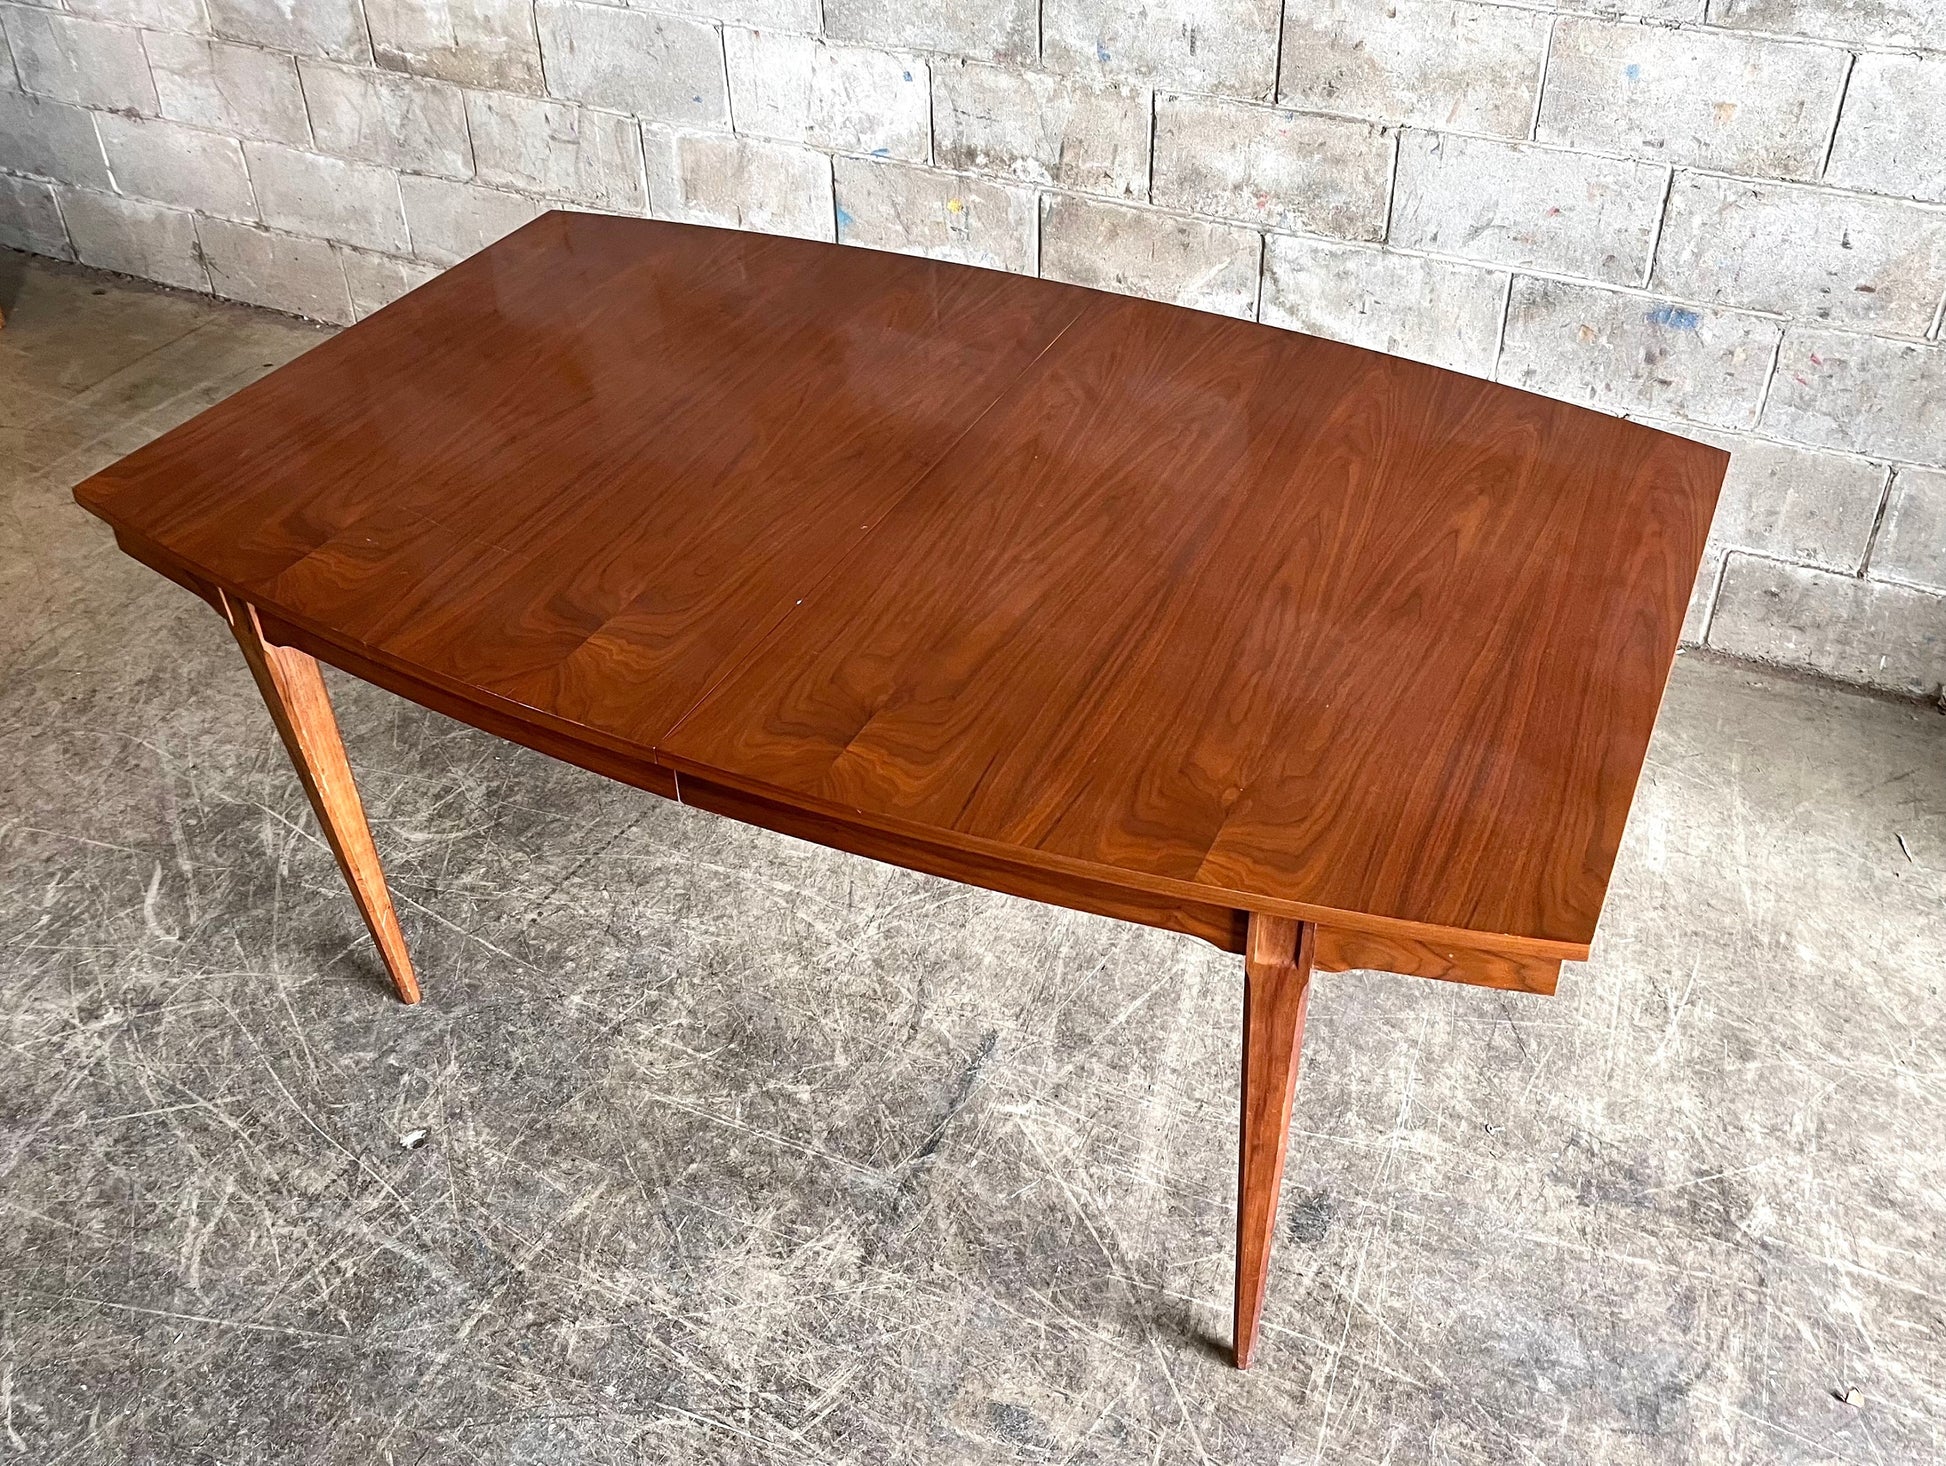 Striking Walnut Grain Detail - Young Manufacturing Vintage Mid Century Modern Dining Table from the 1960s